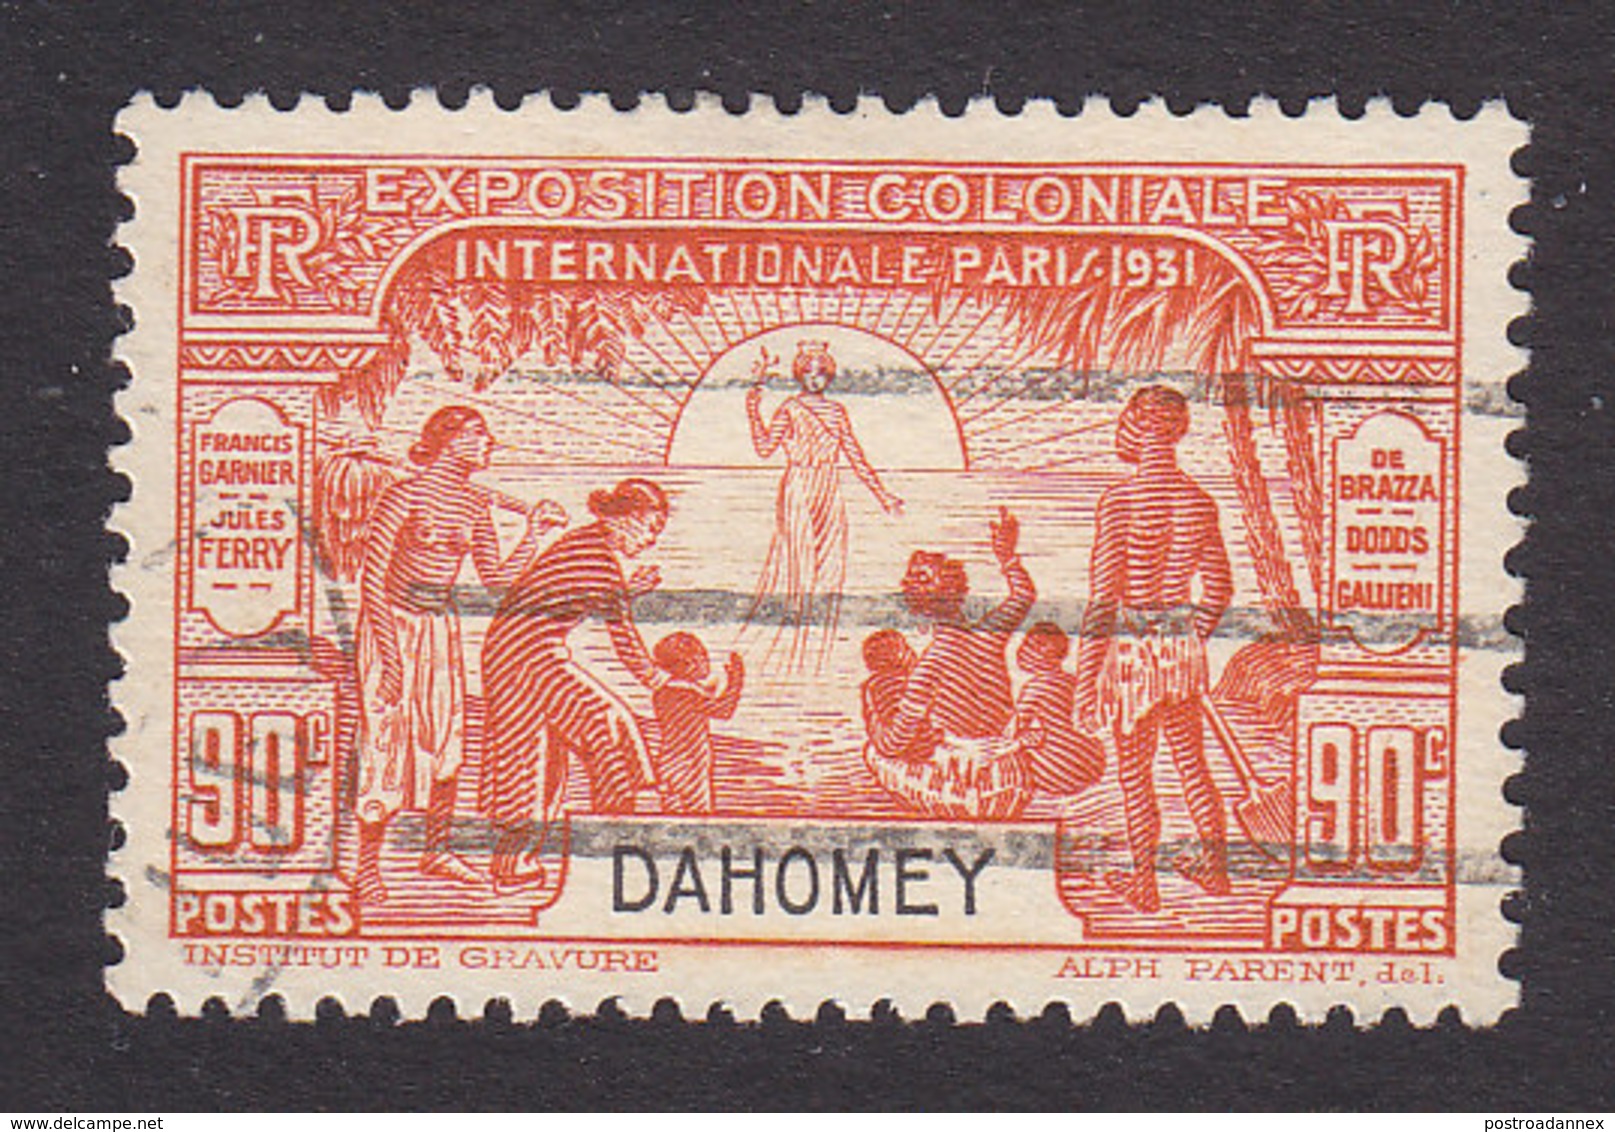 Dahomey, Scott #99, Used, Colonial Exposition, Issued 1931 - Used Stamps